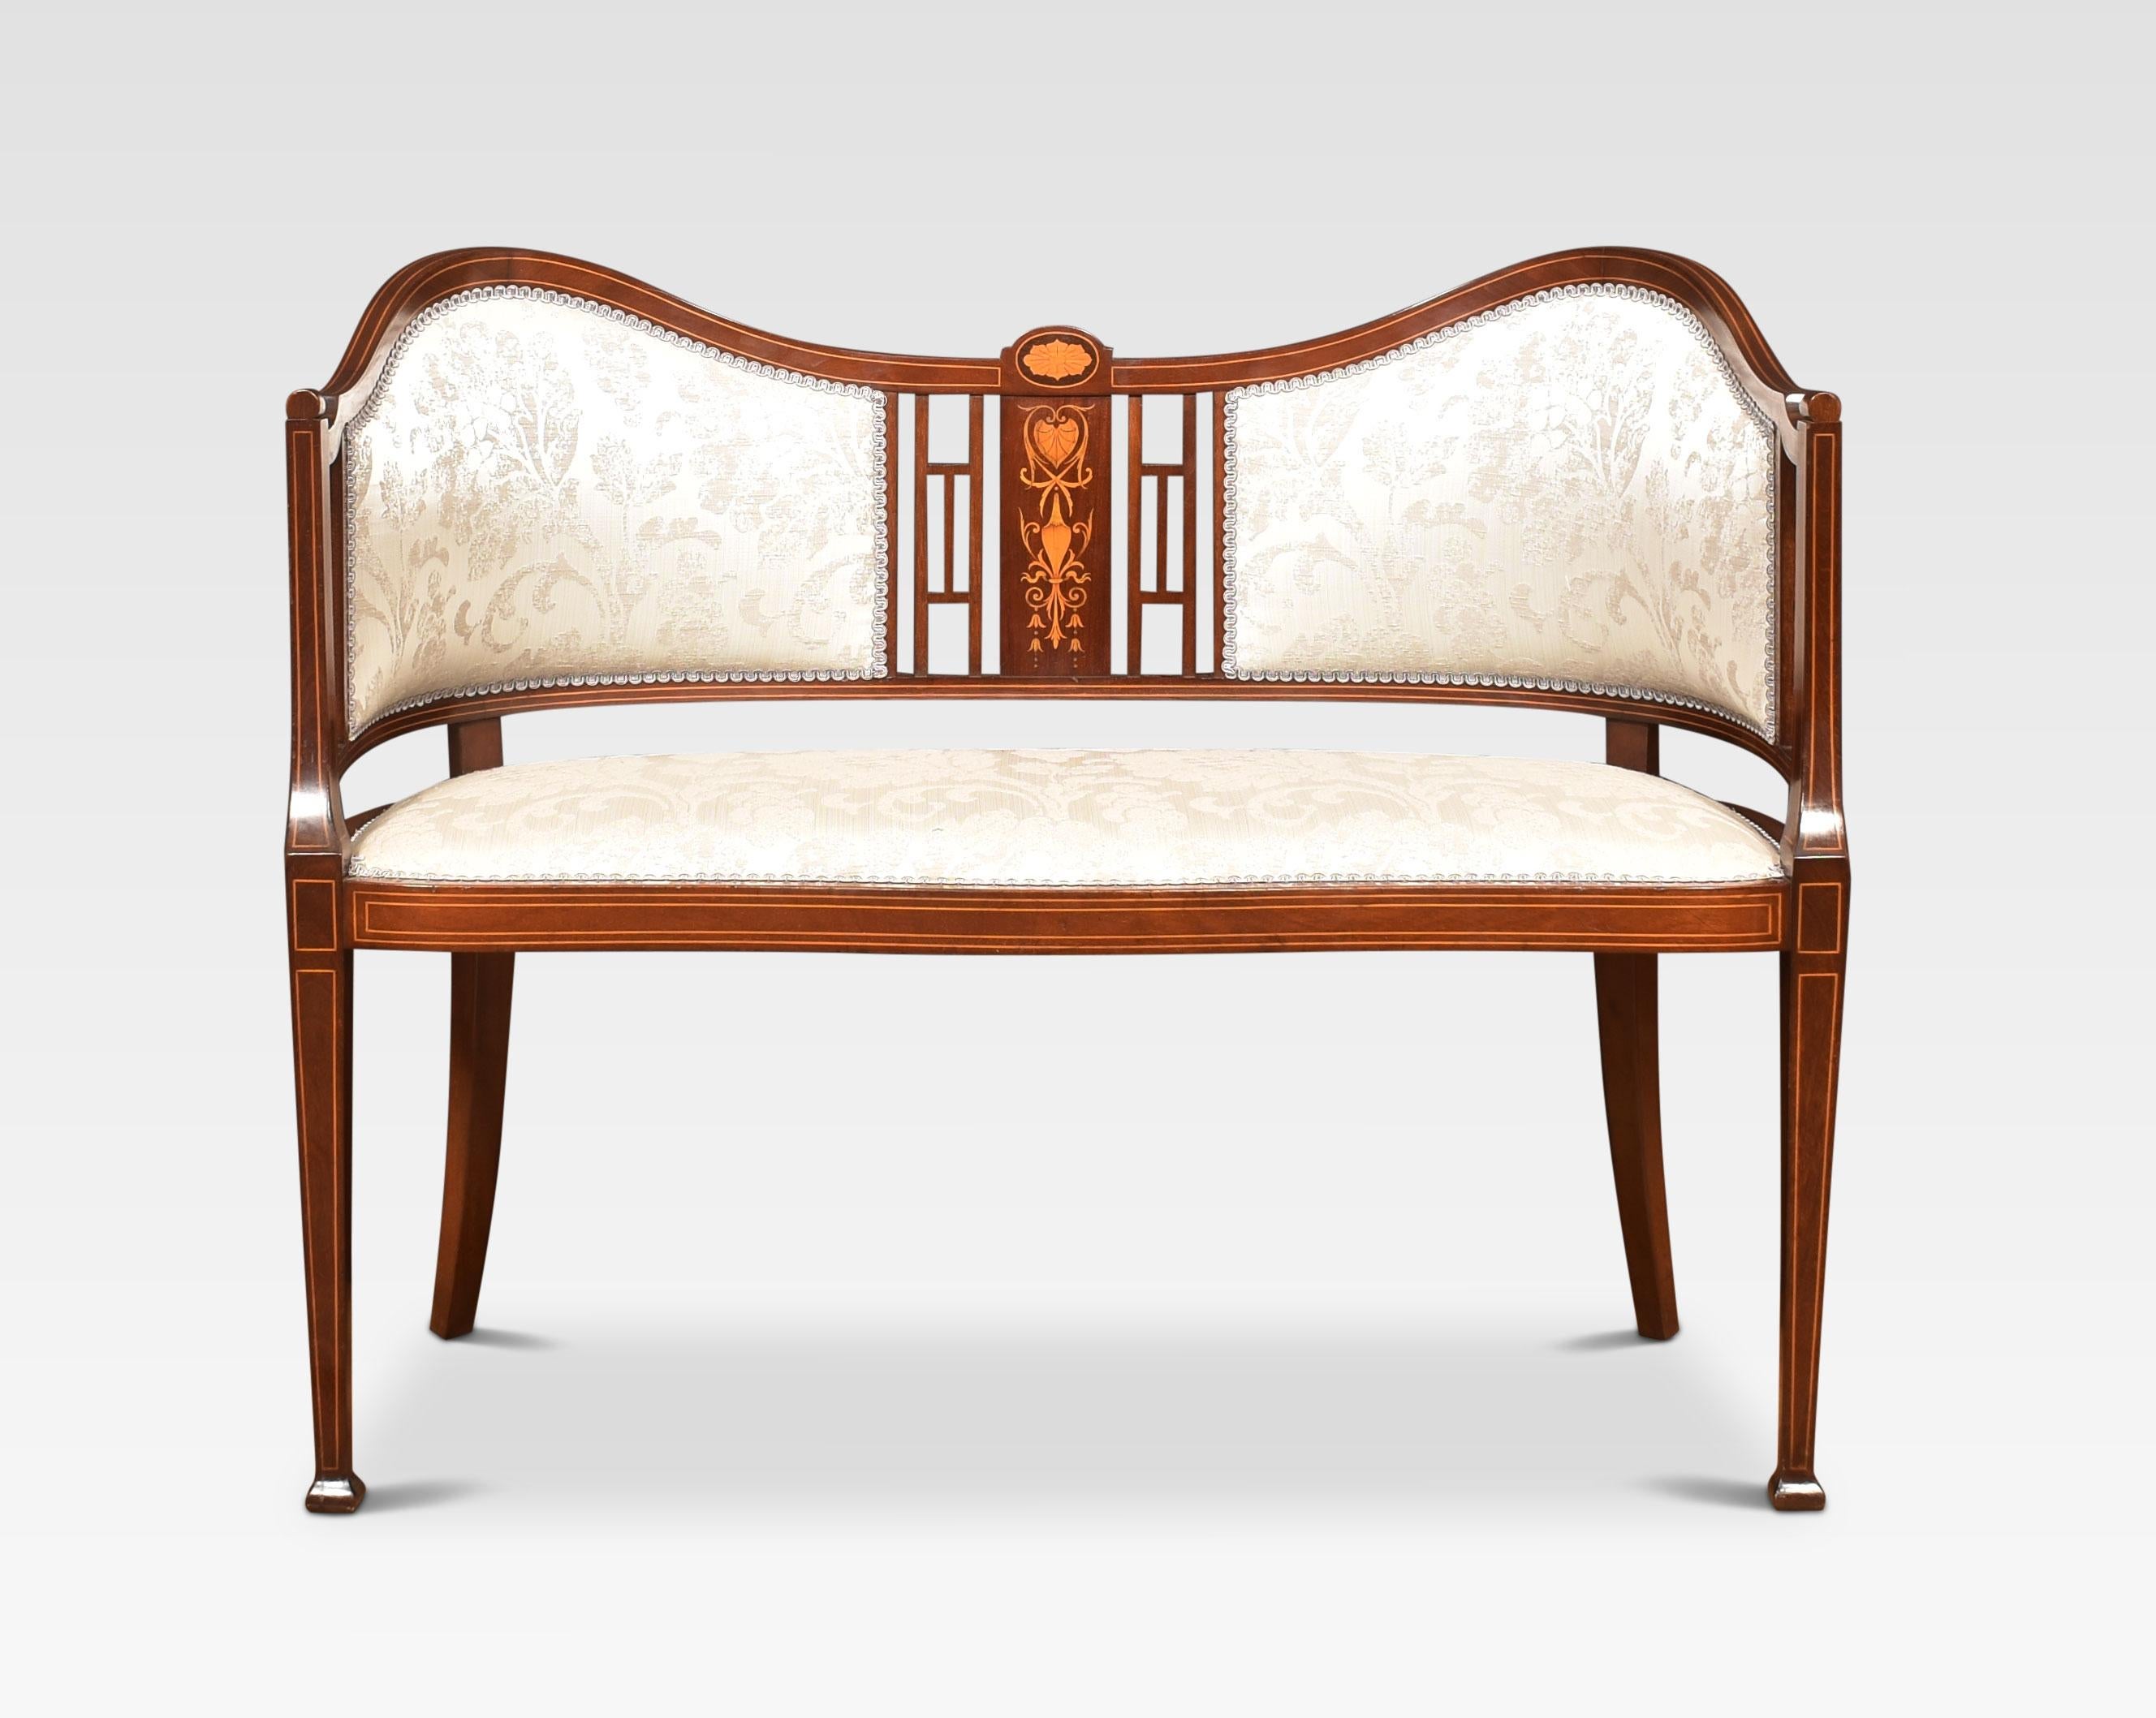 Mahogany inlaid settee, with twin upholstered back panels flanking the inlaid splat. To the upholstered seat flanked by out swept arms. All raised up on square tapering legs.
Dimensions
Height 32 Inches height to seat 18 Inches
Width 39